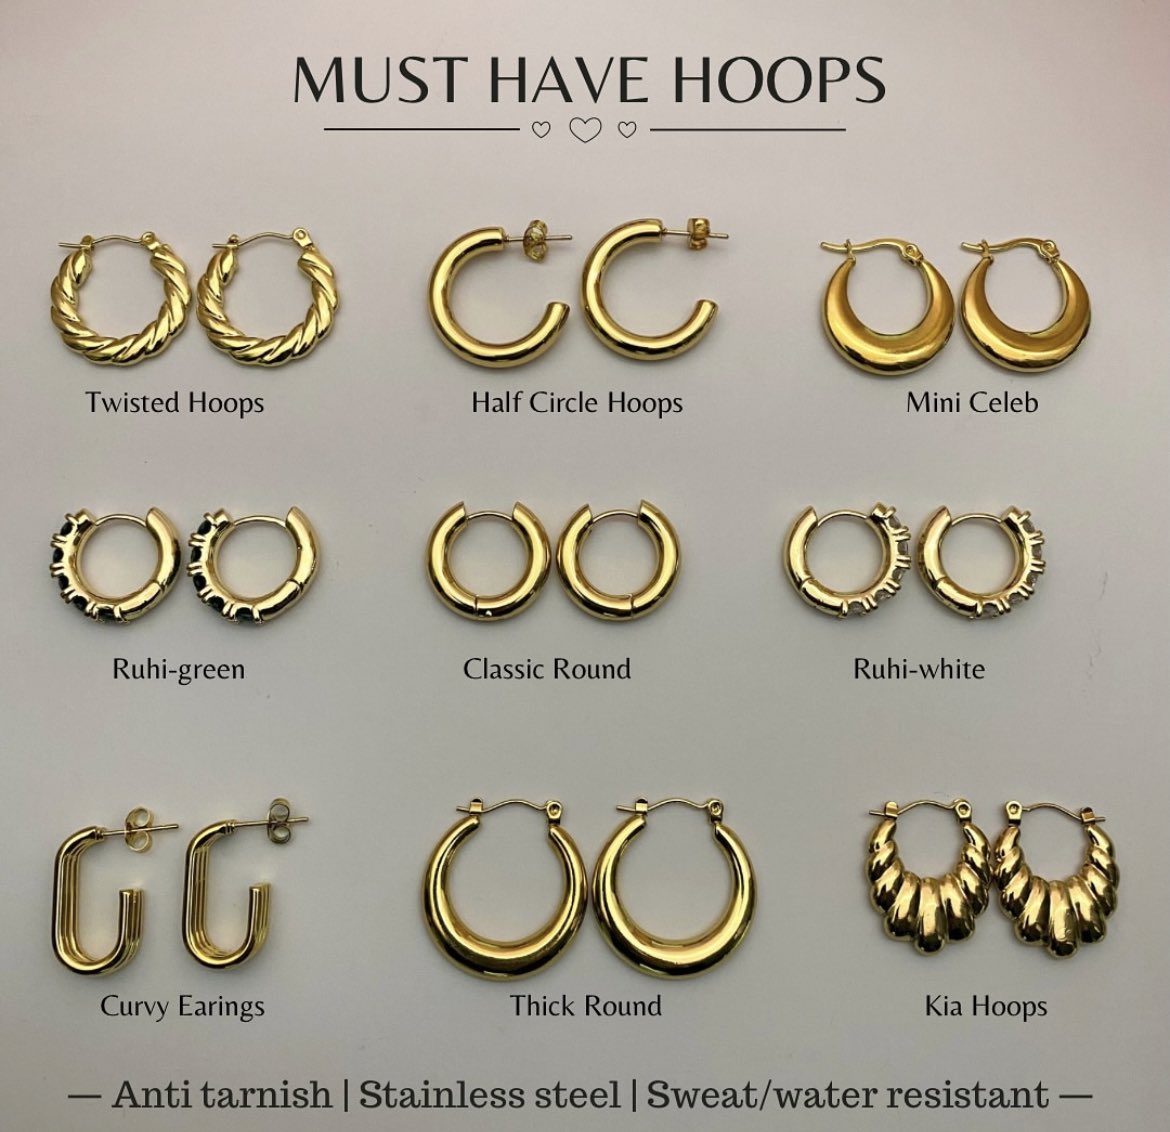 must have hoops 😍